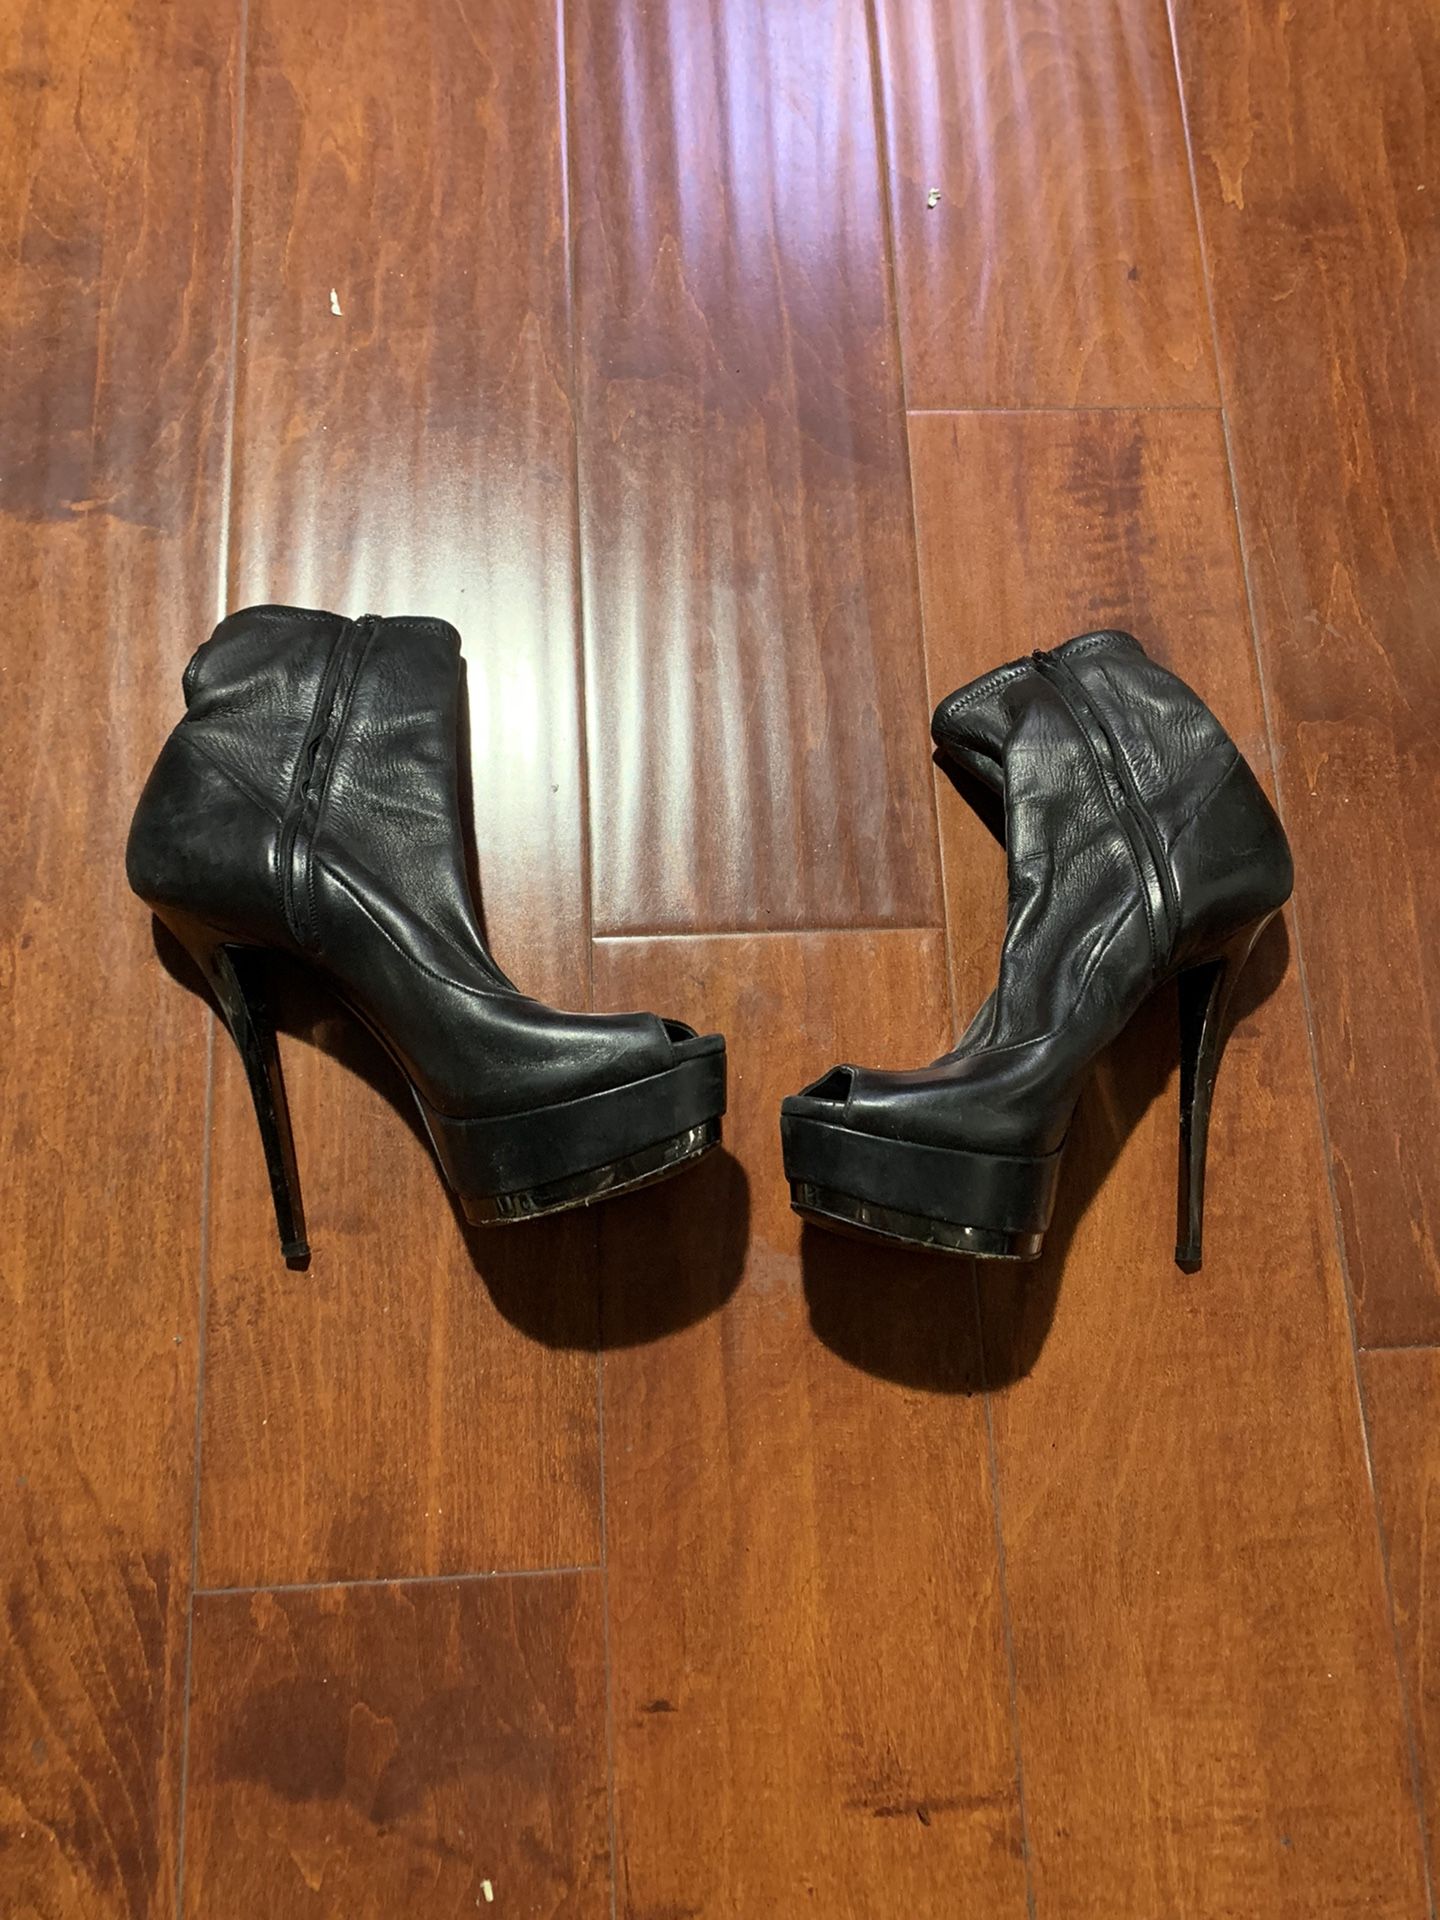 Gucci Women's Black Leather Peep-Toe Platform High Heels 37.5 for Sale in Of CA - OfferUp